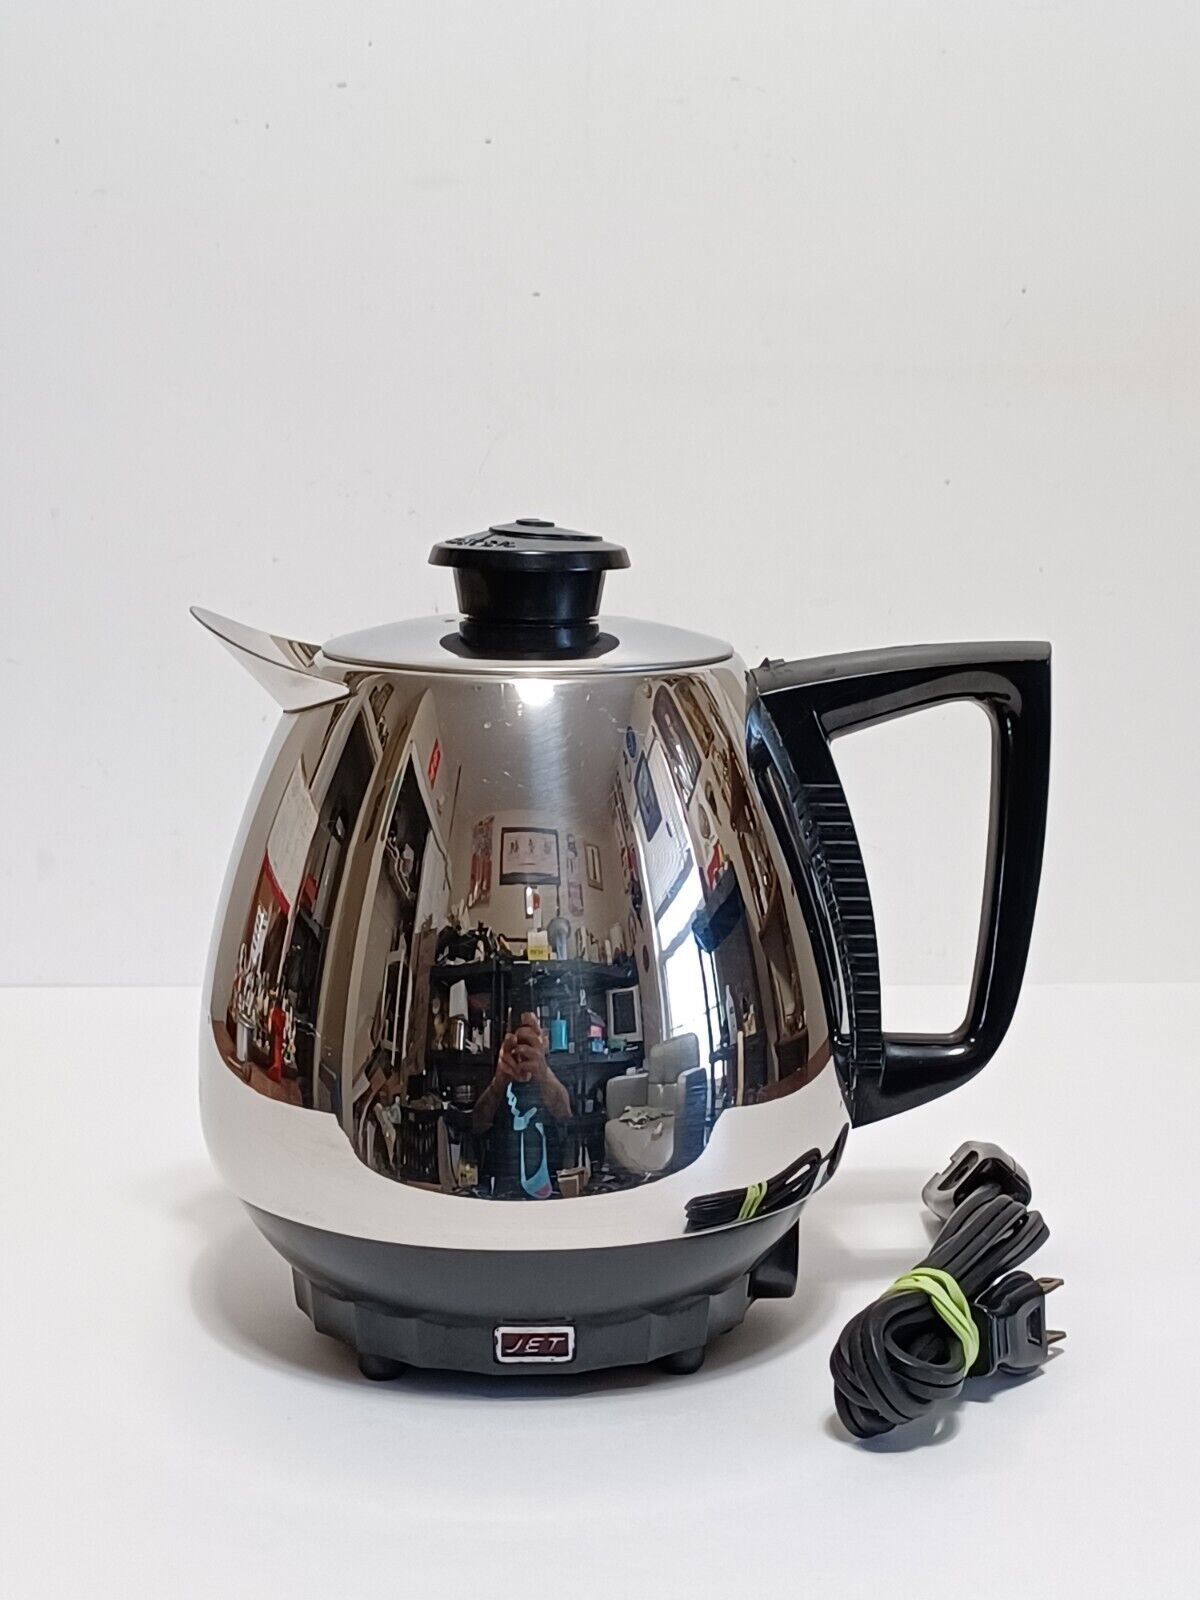 Vtg Saladmaster Jet-O-Matic Model 10 Automatic Electric Coffee Percolator WORKS